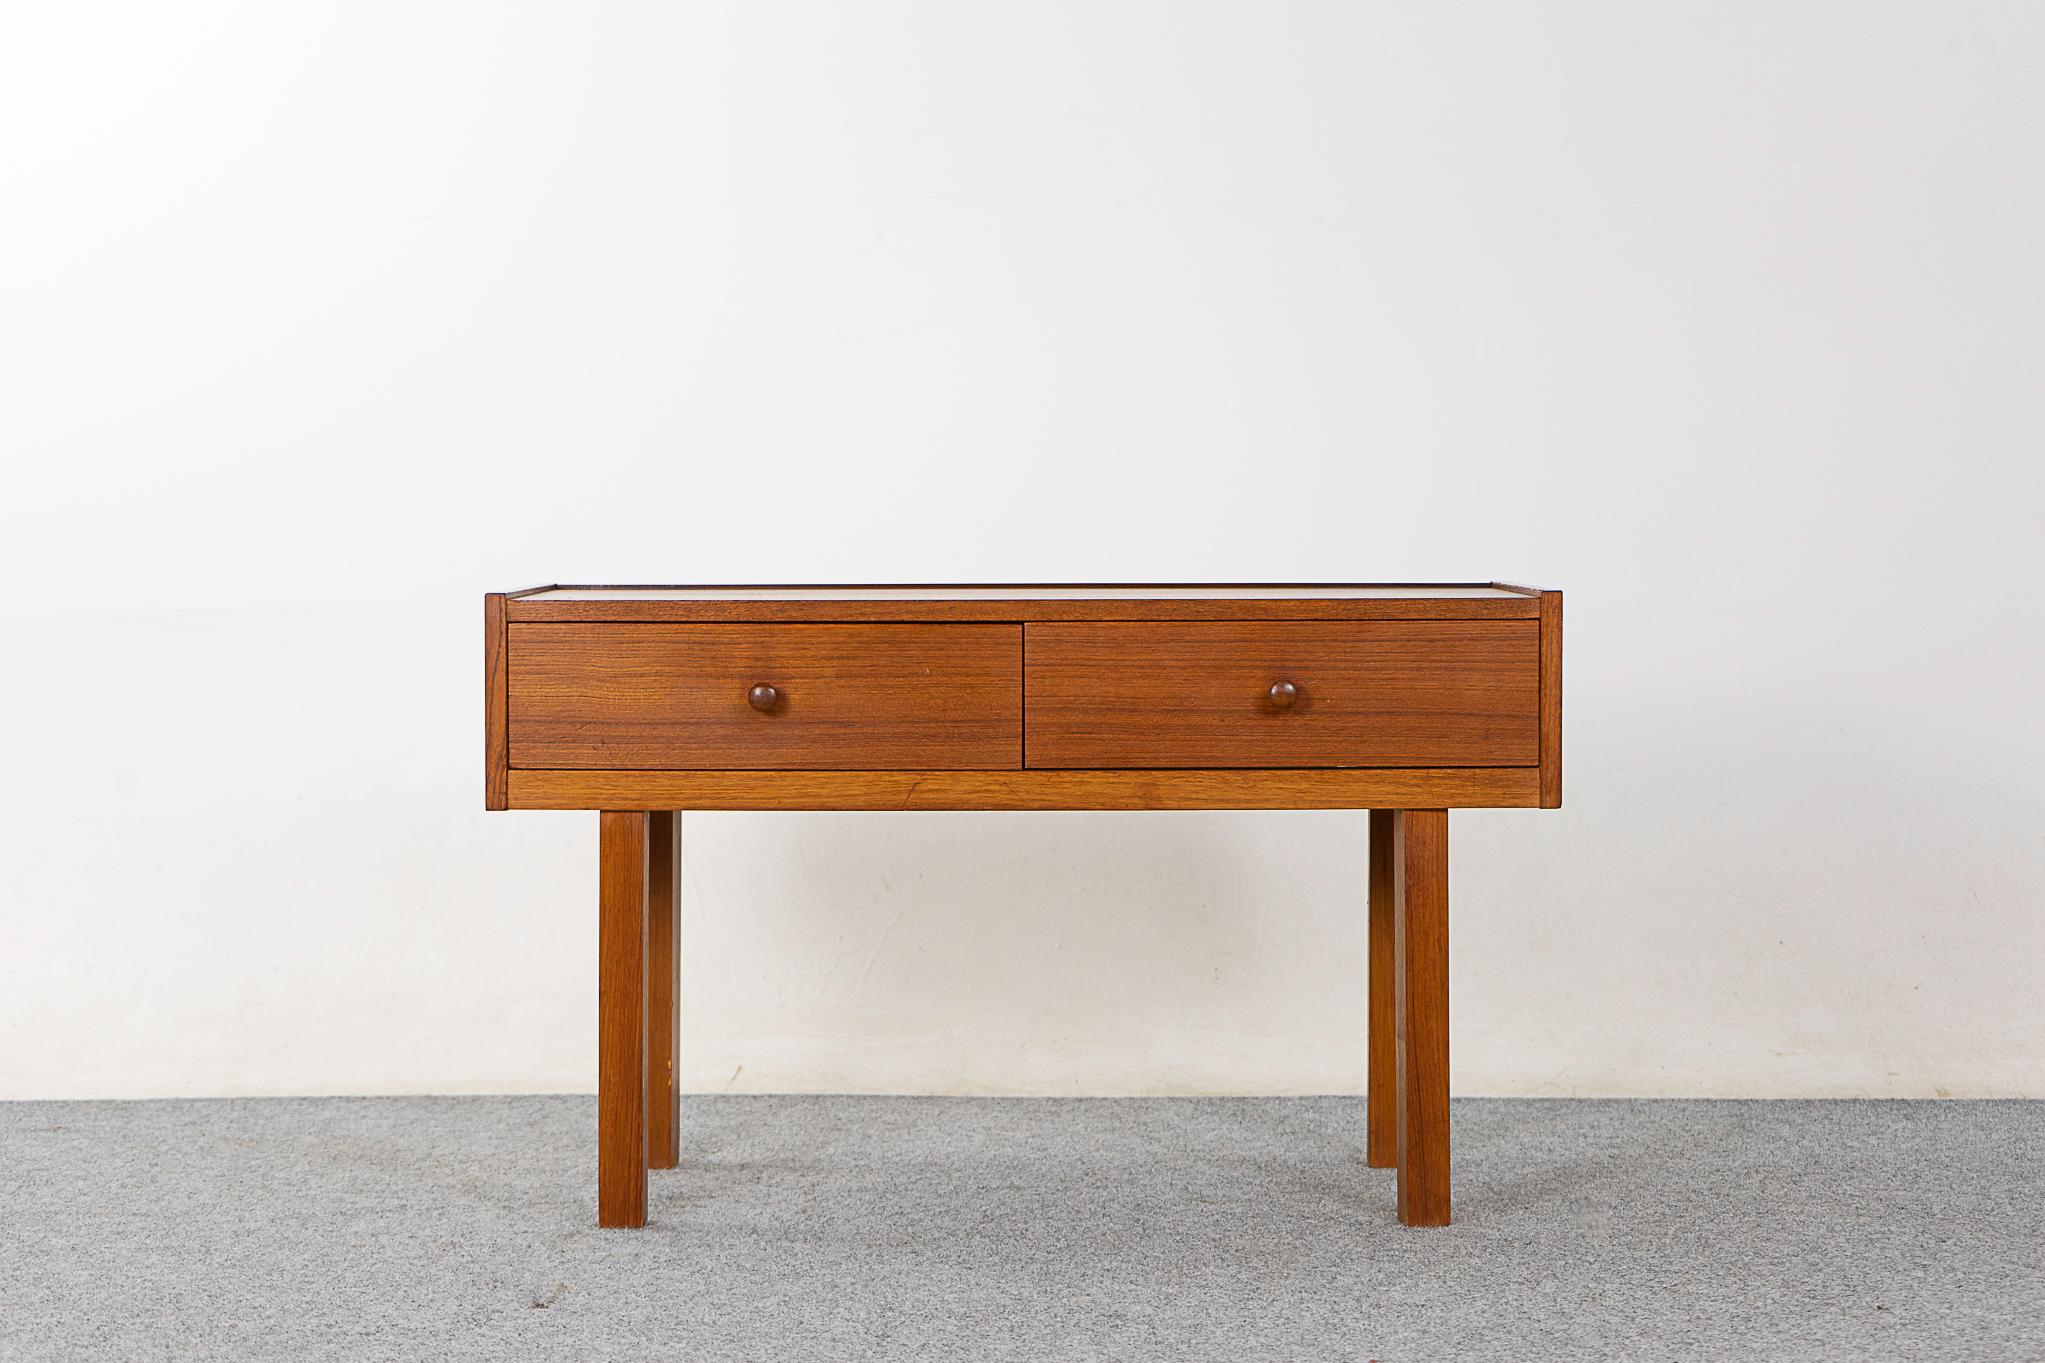 Teak mid-century bedside table, circa 1960's. Nice compact size with beautifully veneered case and slender legs. 